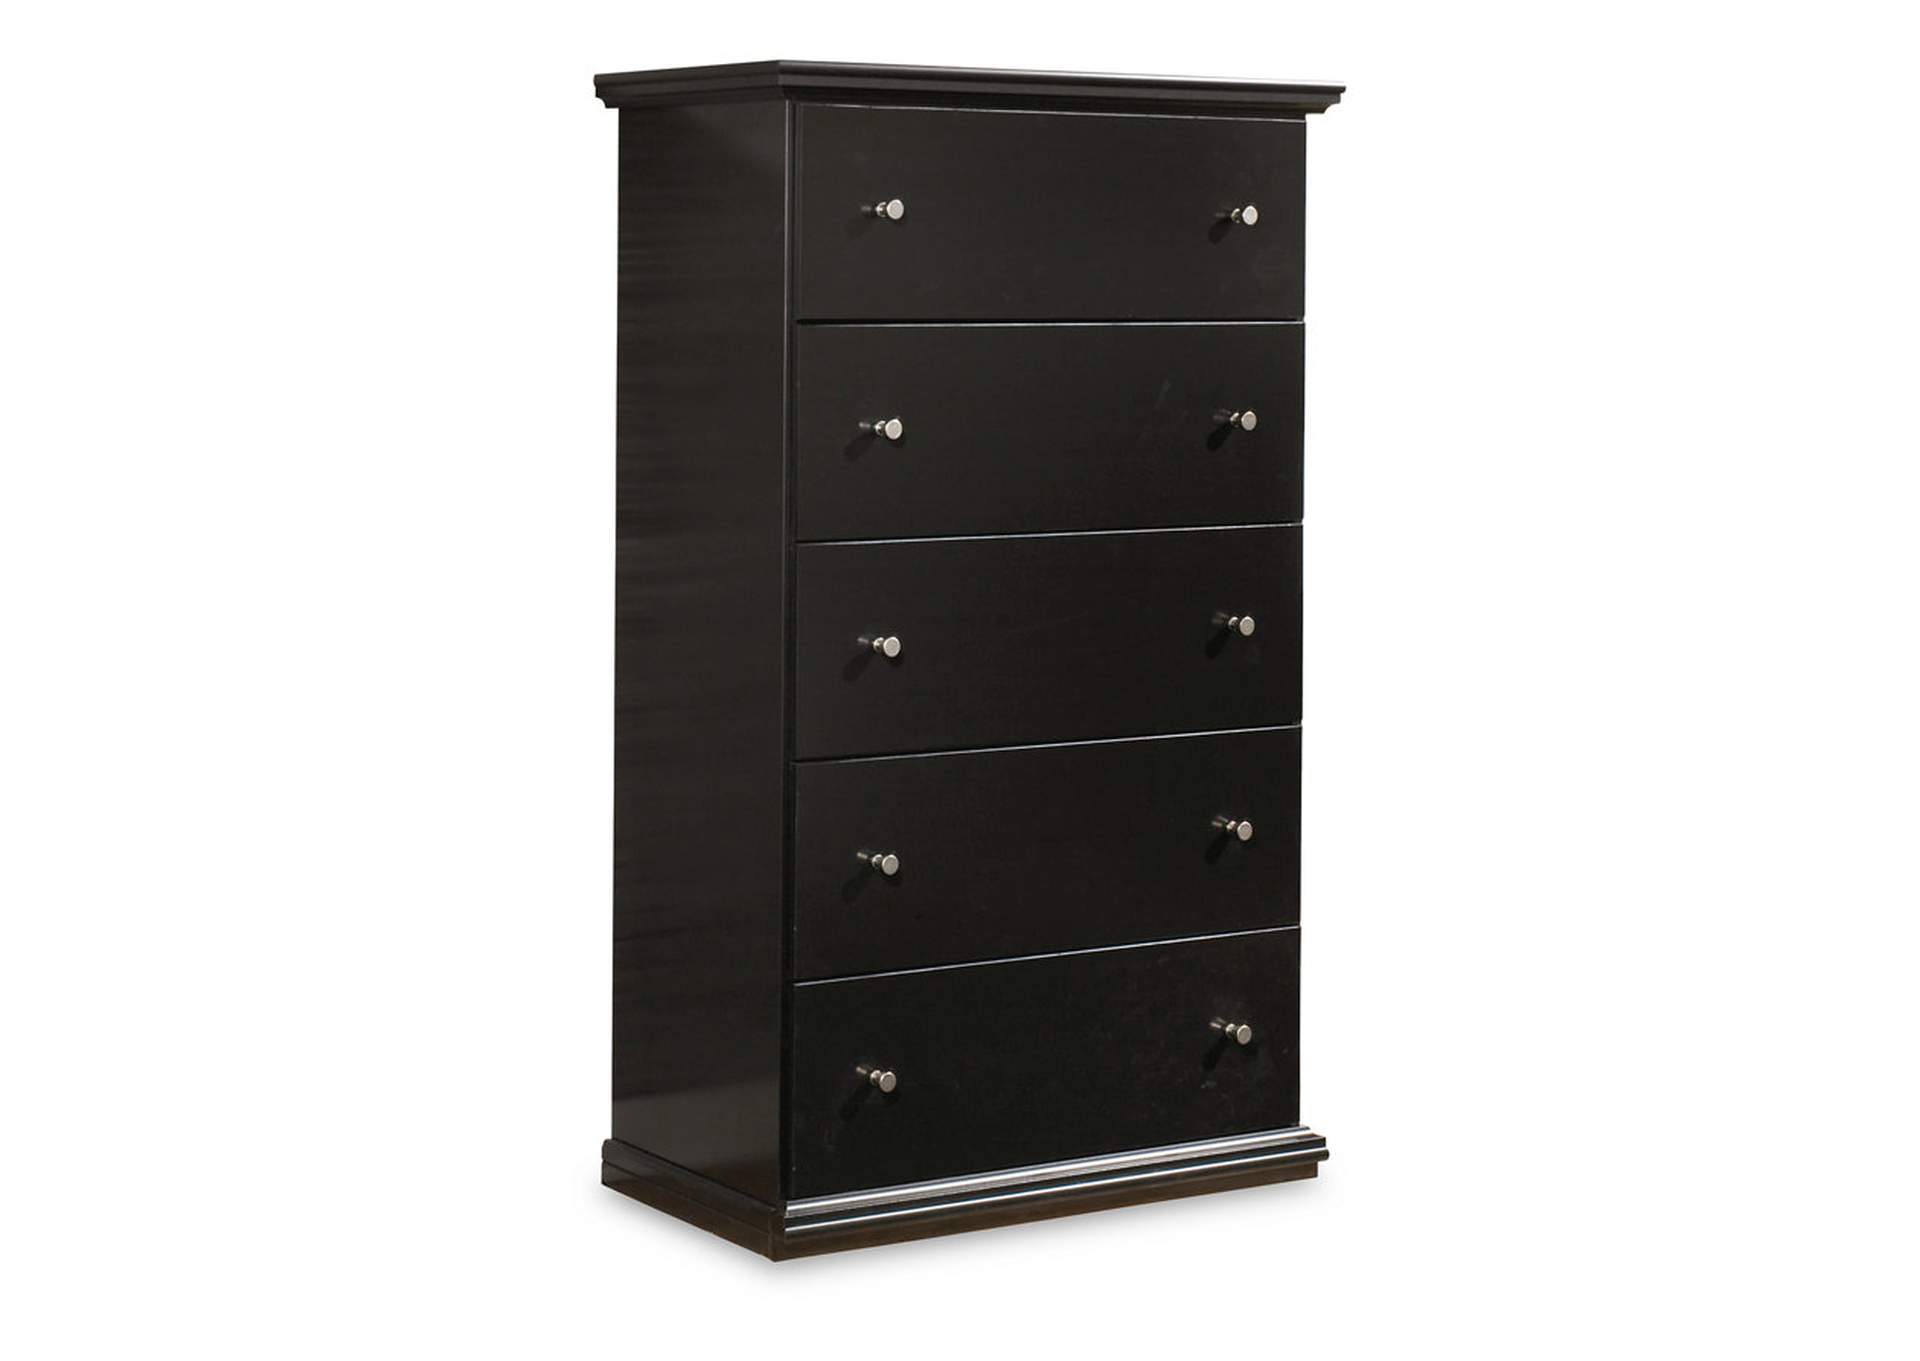 Maribel King Panel Bed, Dresser, Mirror, Chest, and 2 Nightstands,Signature Design By Ashley